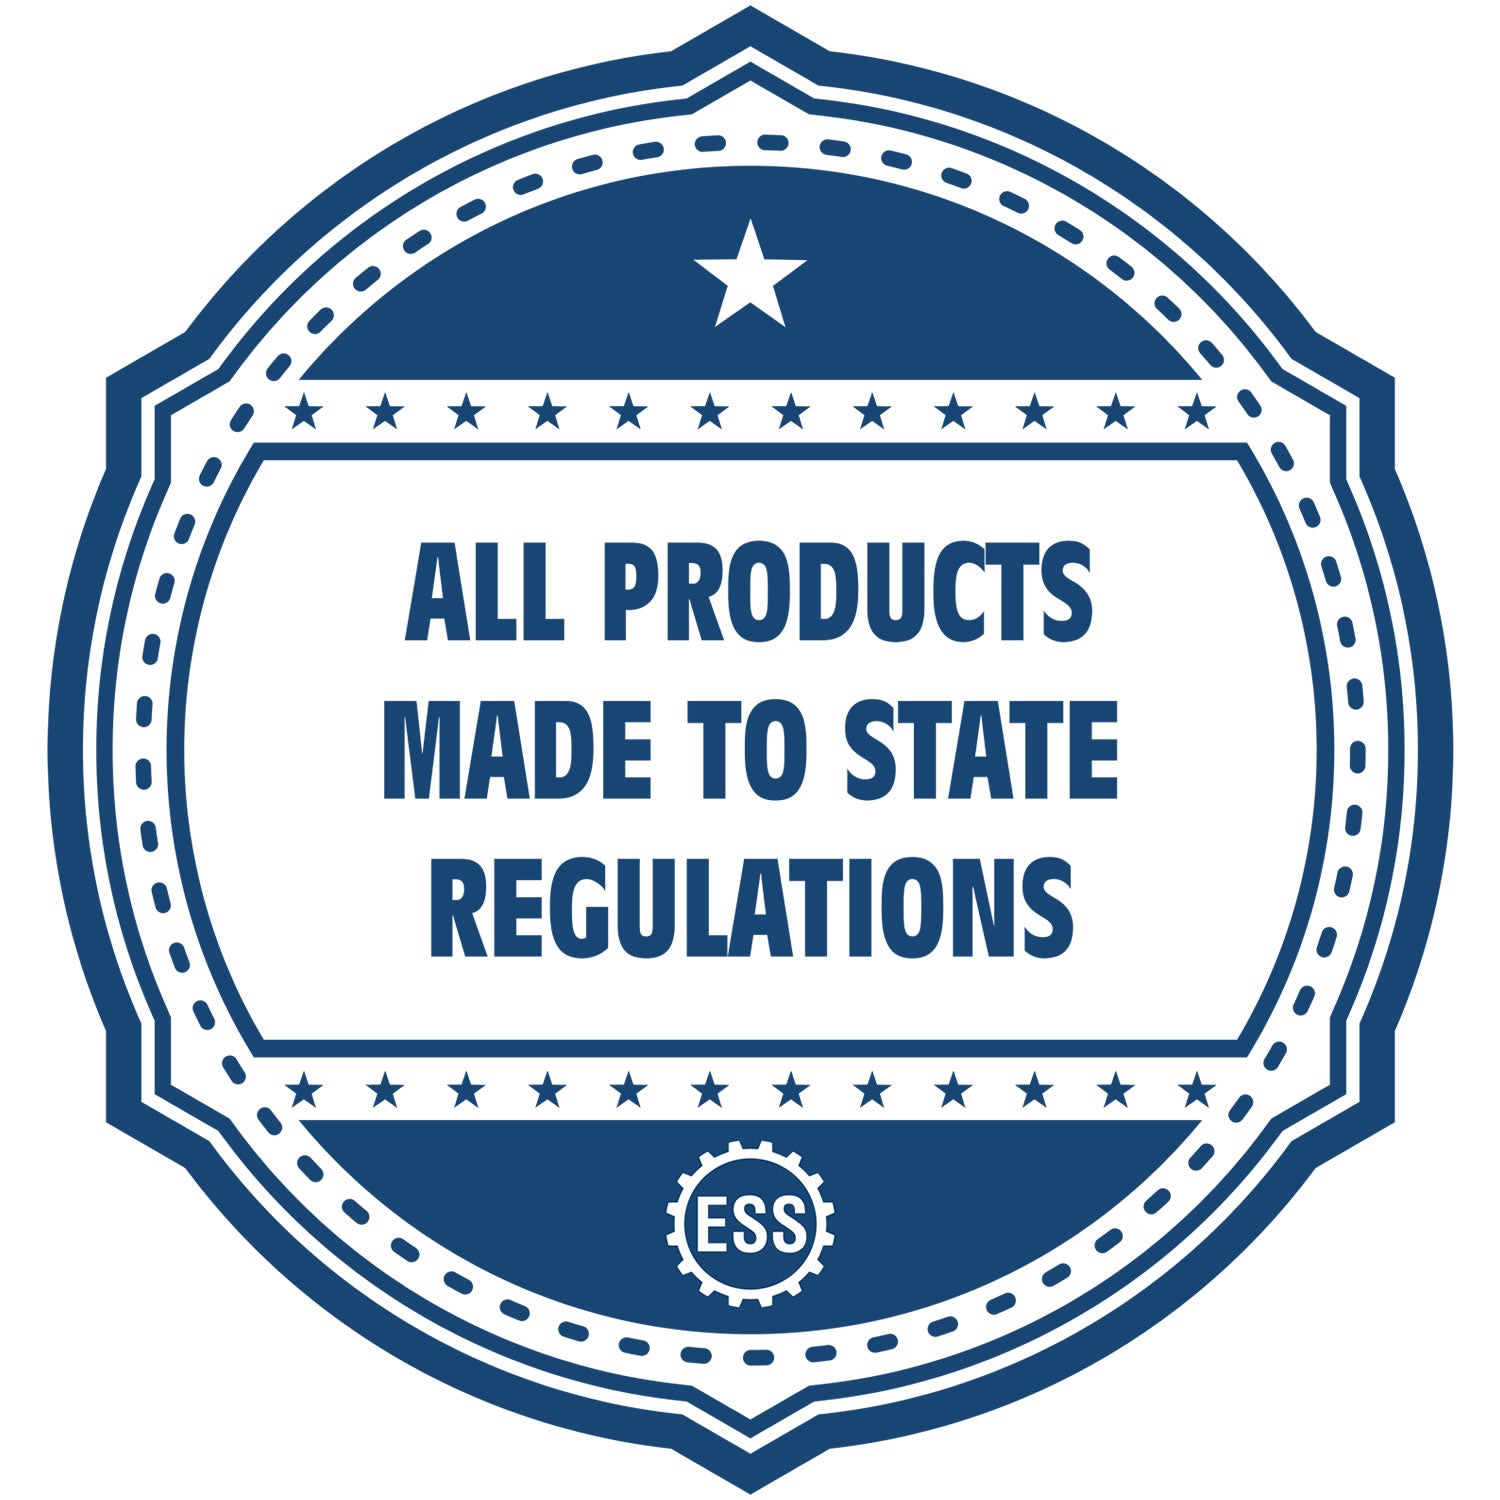 An icon or badge element for the Handheld New Mexico Land Surveyor Seal showing that this product is made in compliance with state regulations.